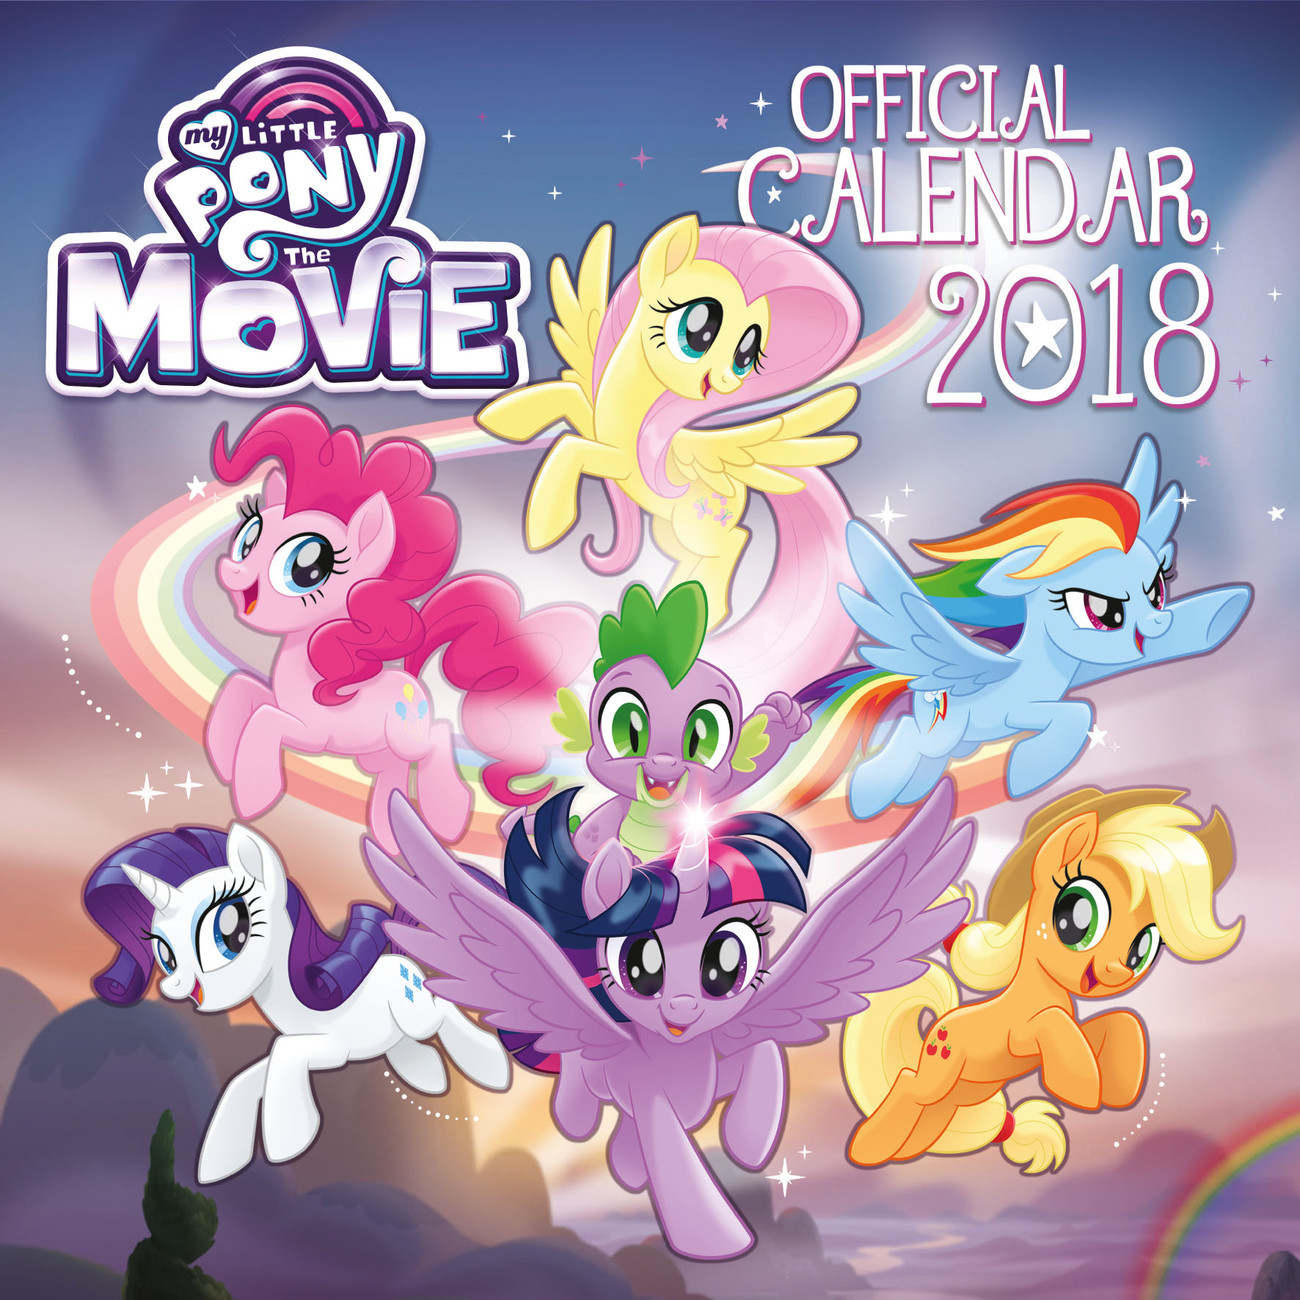 my-little-pony-movie-calendars-2019-on-ukposters-ukposters